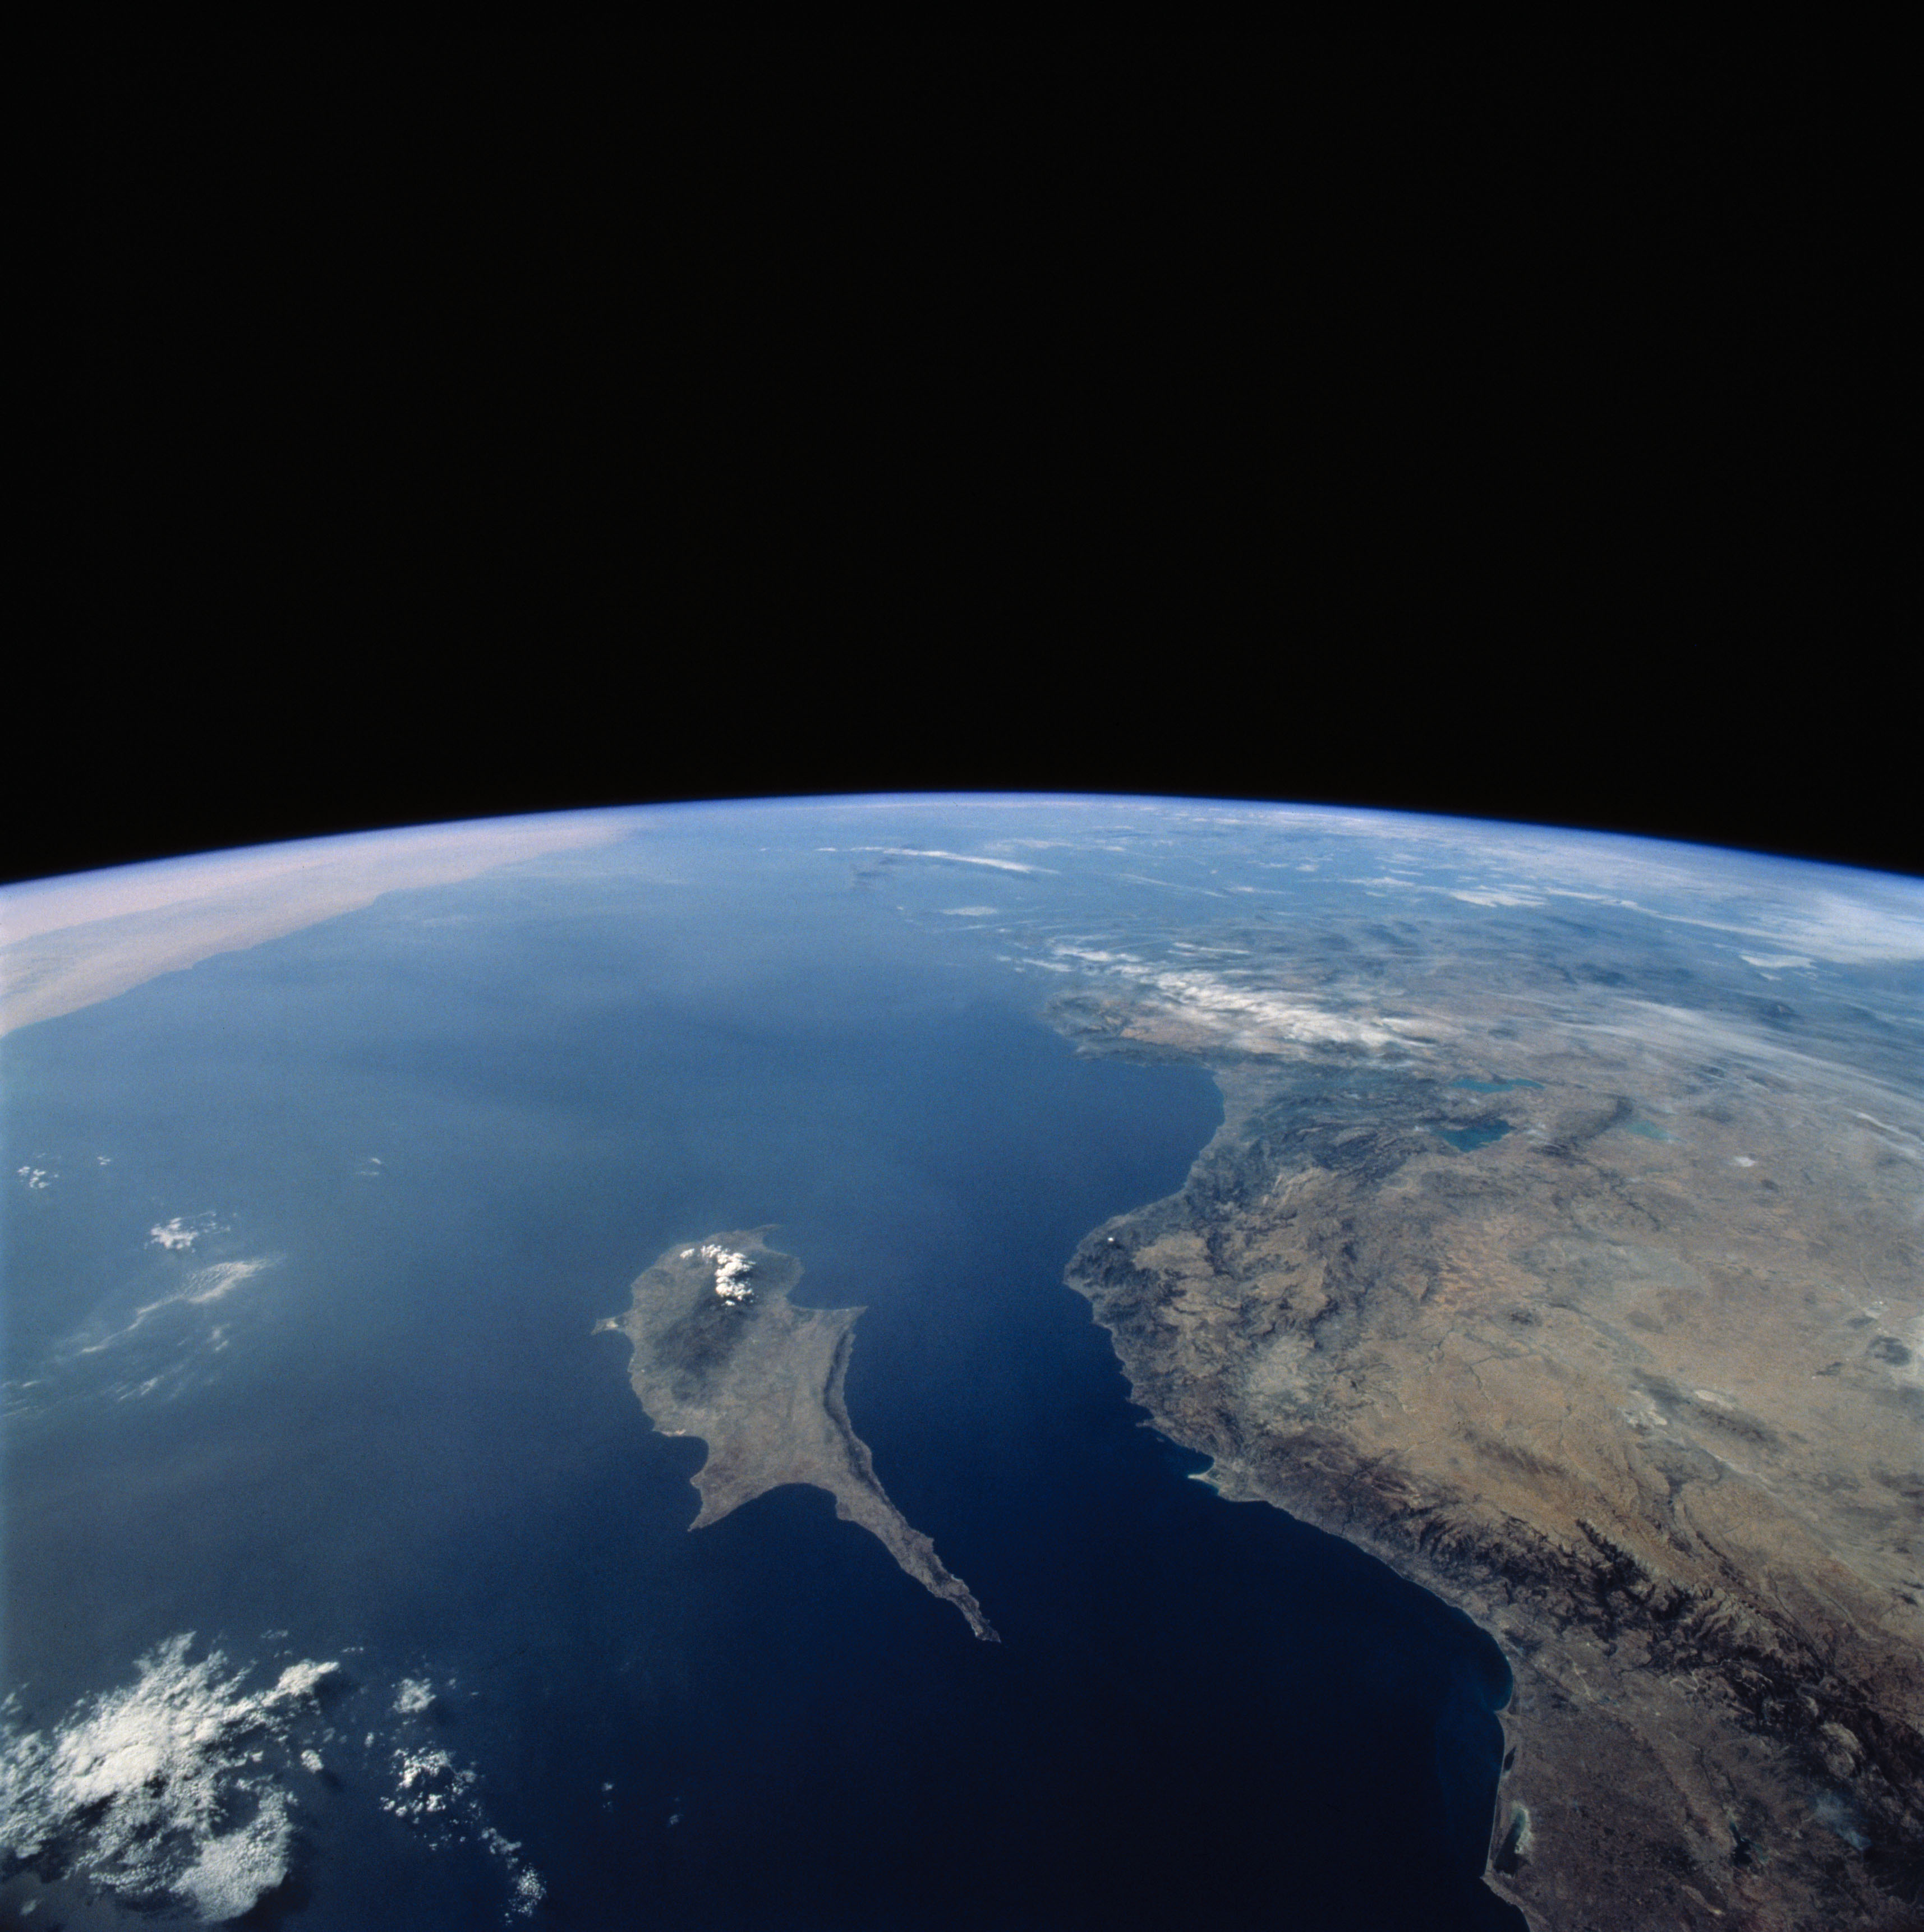 Earth observation photographs taken by the STS-58 crew. Cyprus, Türkiye, and the eastern Mediterranean Sea.